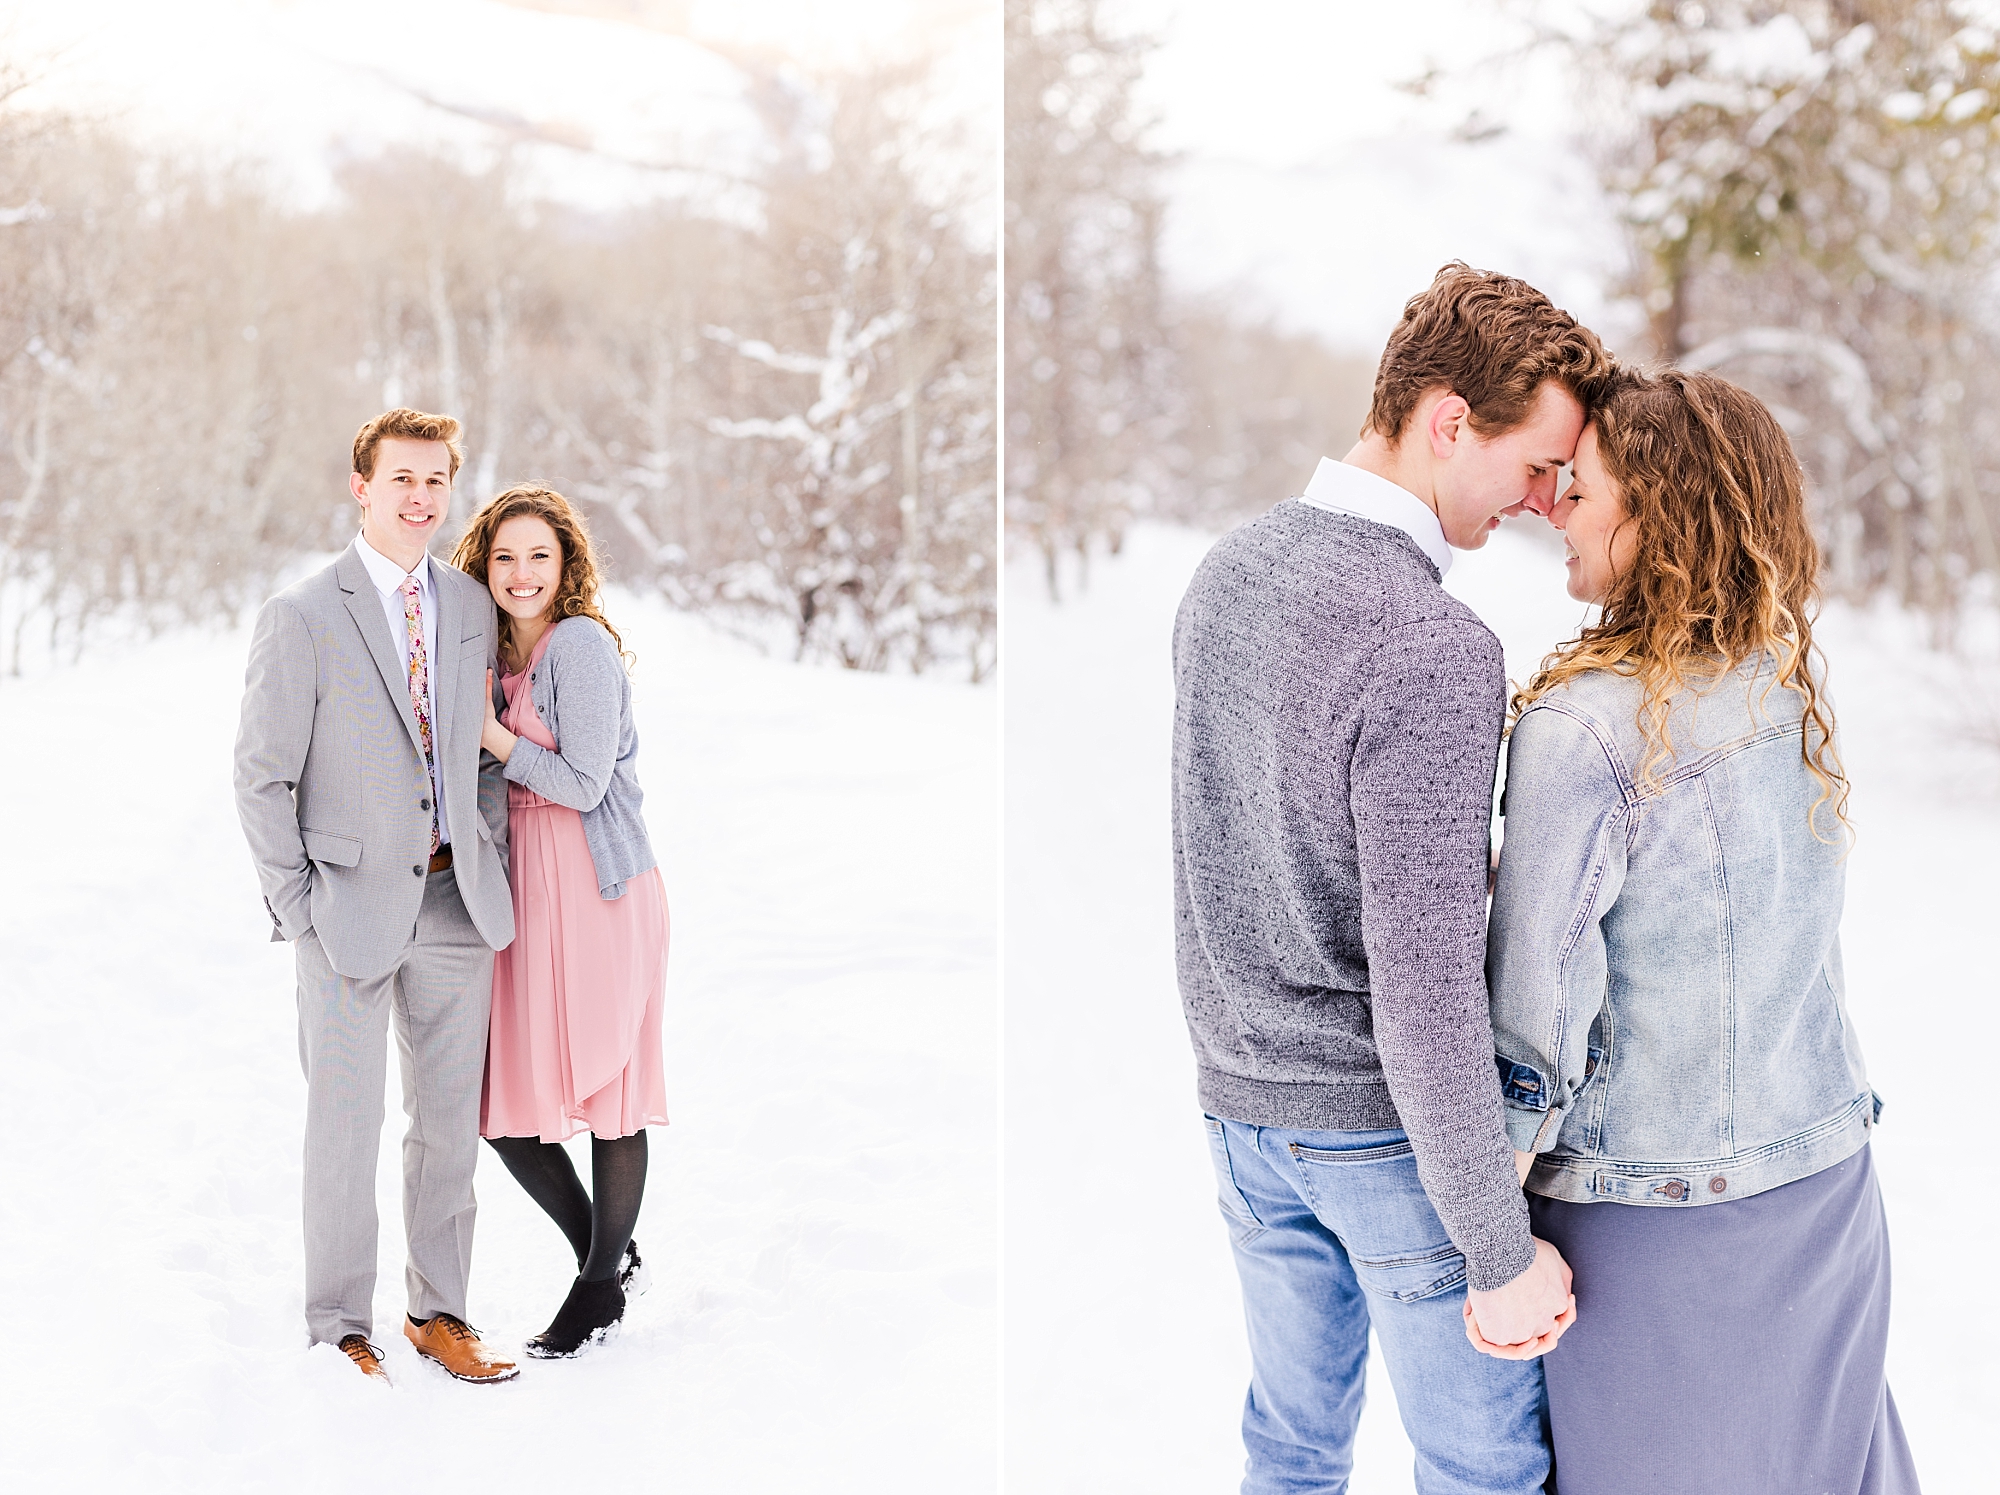 What to wear for your Utah engagement session